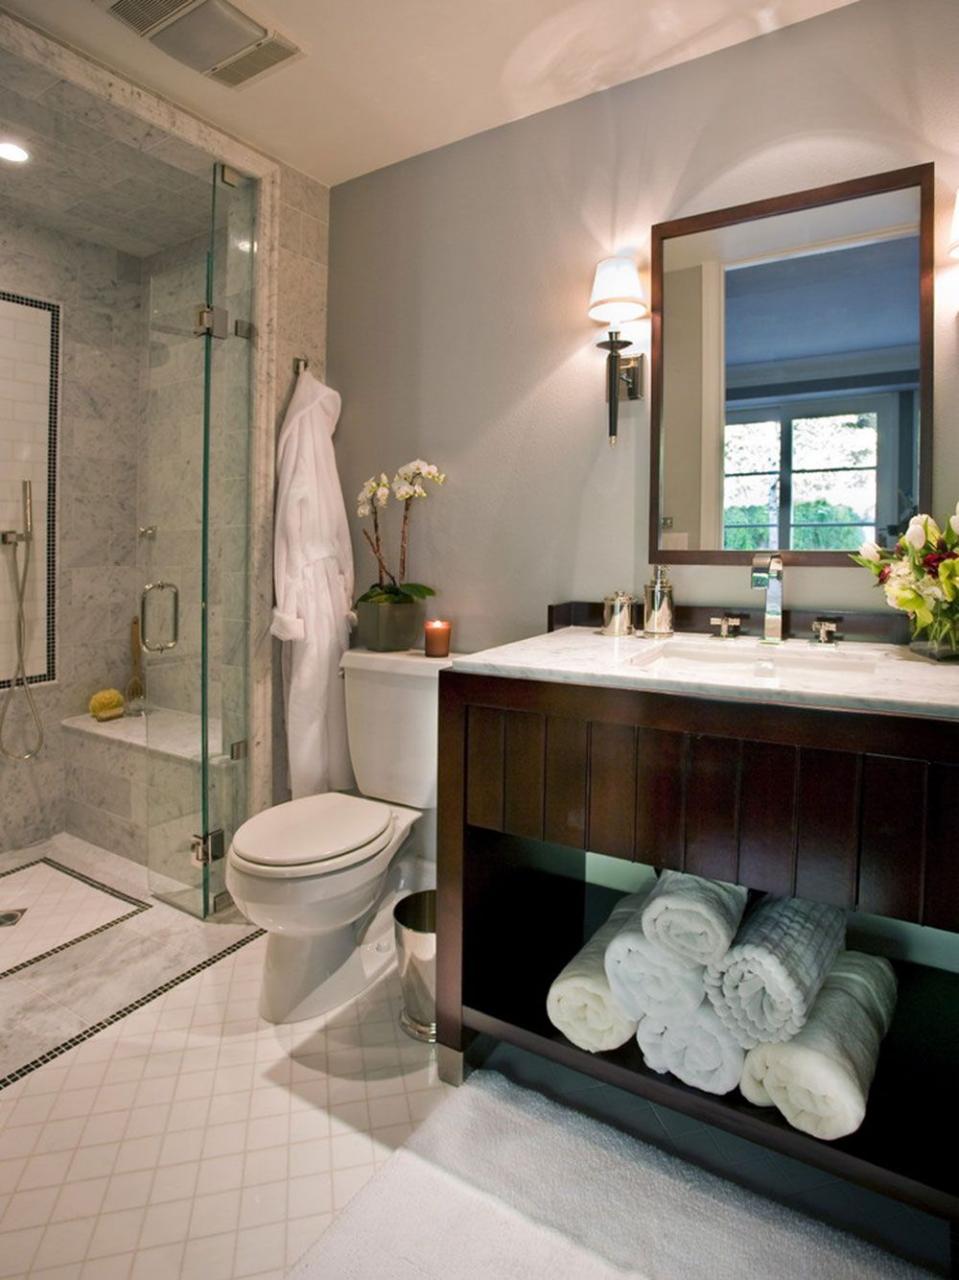 Powder Room Ideas To Impress Your Guests (71 Pictures) Guest bathroom